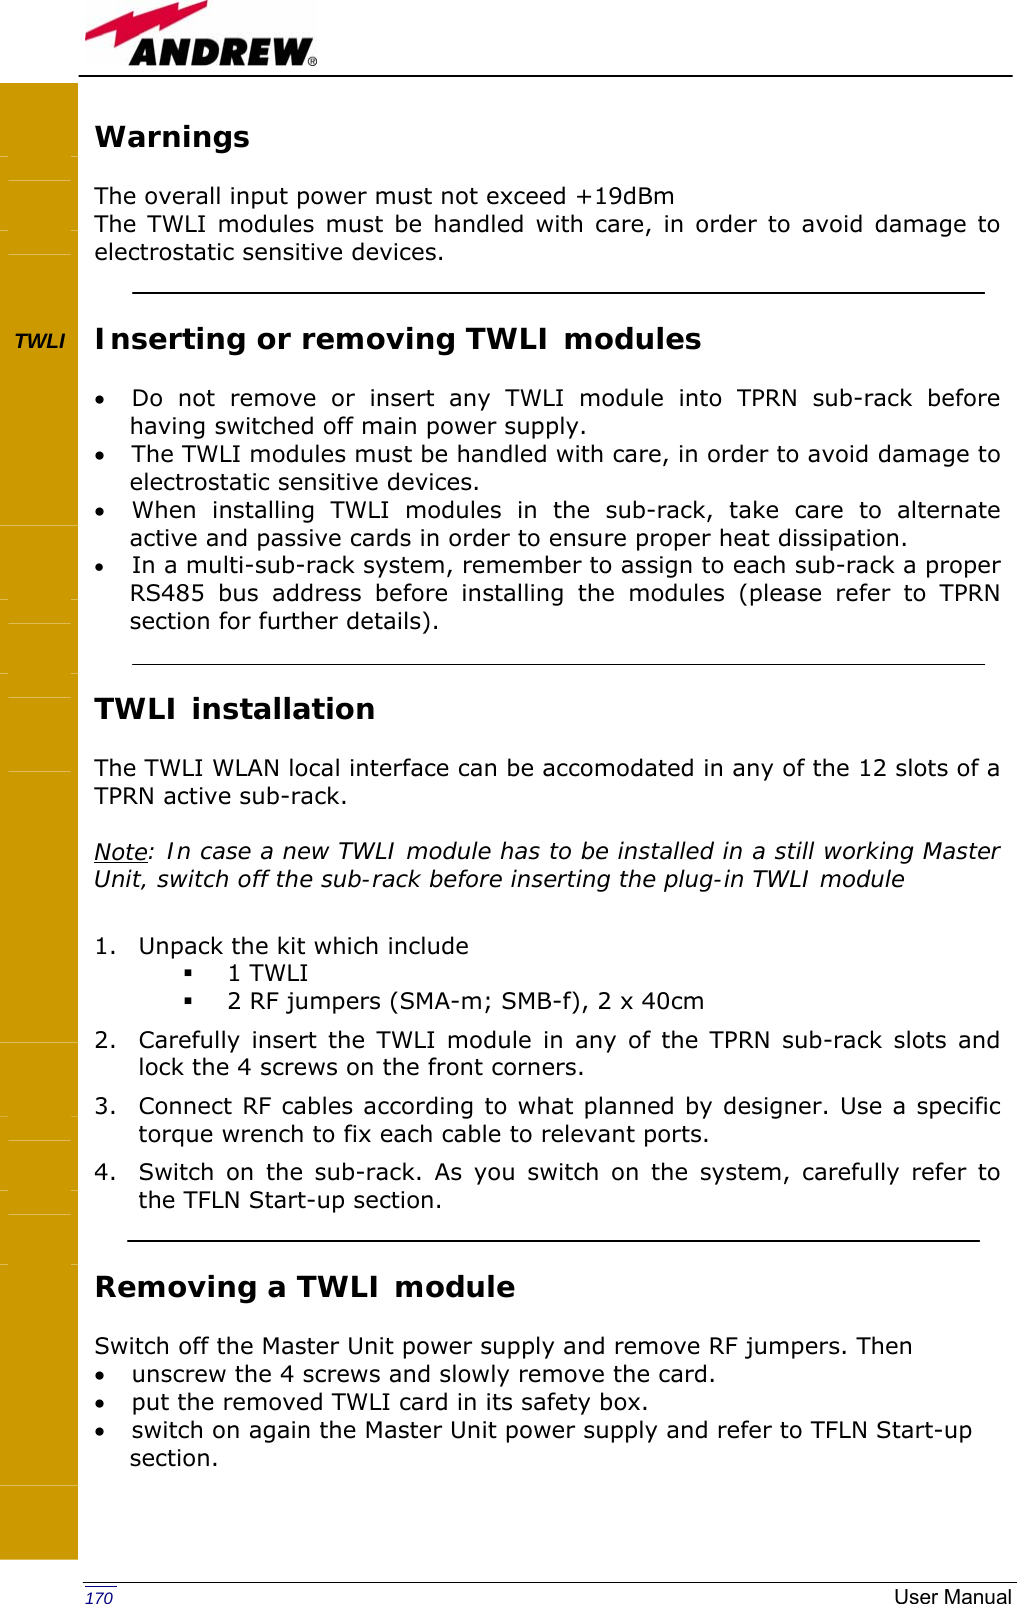   170  User ManualWarnings  The overall input power must not exceed +19dBm The TWLI modules must be handled with care, in order to avoid damage to electrostatic sensitive devices.   Inserting or removing TWLI modules  • Do not remove or insert any TWLI module into TPRN sub-rack before having switched off main power supply. • The TWLI modules must be handled with care, in order to avoid damage to electrostatic sensitive devices. • When installing TWLI modules in the sub-rack, take care to alternate active and passive cards in order to ensure proper heat dissipation. • In a multi-sub-rack system, remember to assign to each sub-rack a proper RS485 bus address before installing the modules (please refer to TPRN section for further details).   TWLI installation  The TWLI WLAN local interface can be accomodated in any of the 12 slots of a TPRN active sub-rack.  Note: In case a new TWLI module has to be installed in a still working Master Unit, switch off the sub-rack before inserting the plug-in TWLI module  1. Unpack the kit which include  1 TWLI  2 RF jumpers (SMA-m; SMB-f), 2 x 40cm 2. Carefully insert the TWLI module in any of the TPRN sub-rack slots and lock the 4 screws on the front corners. 3. Connect RF cables according to what planned by designer. Use a specific torque wrench to fix each cable to relevant ports. 4. Switch on the sub-rack. As you switch on the system, carefully refer to the TFLN Start-up section.   Removing a TWLI module  Switch off the Master Unit power supply and remove RF jumpers. Then  • unscrew the 4 screws and slowly remove the card. • put the removed TWLI card in its safety box. • switch on again the Master Unit power supply and refer to TFLN Start-up section.     TWLI                 